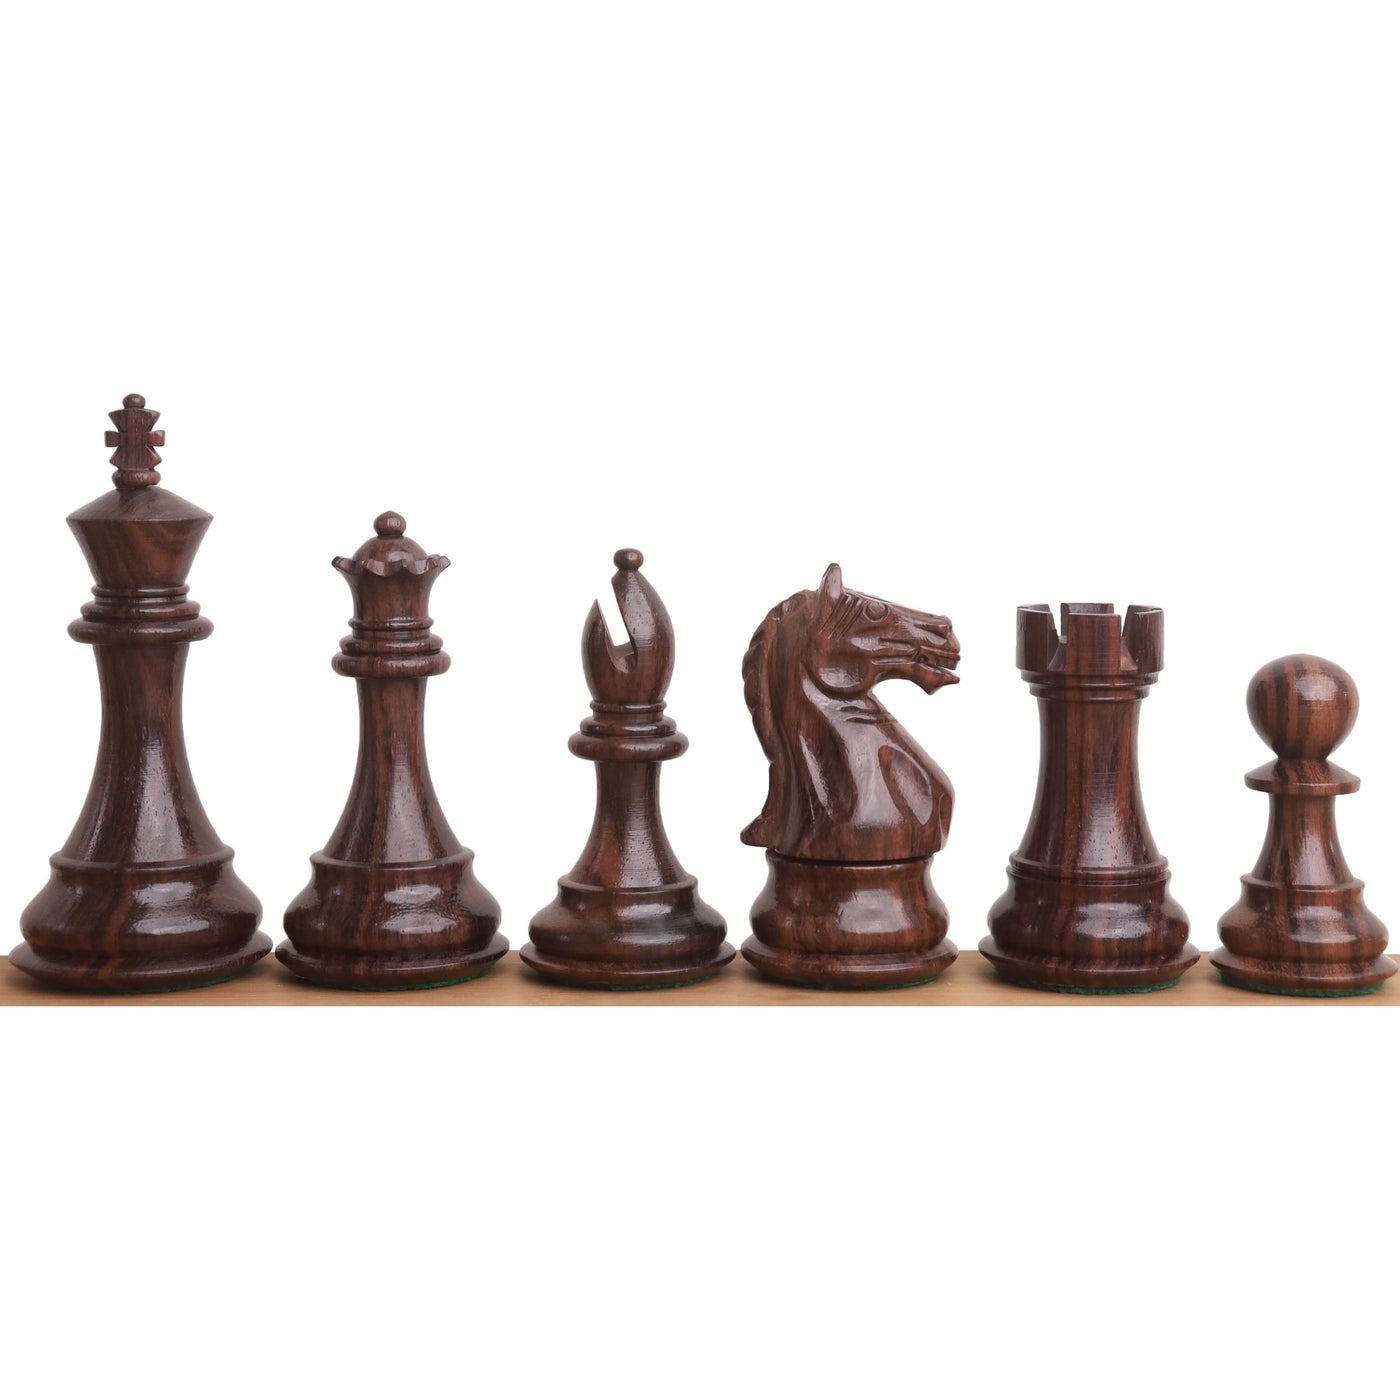 4" Fierce Knight Staunton Chess Pieces Only set - Weighted Rosewood